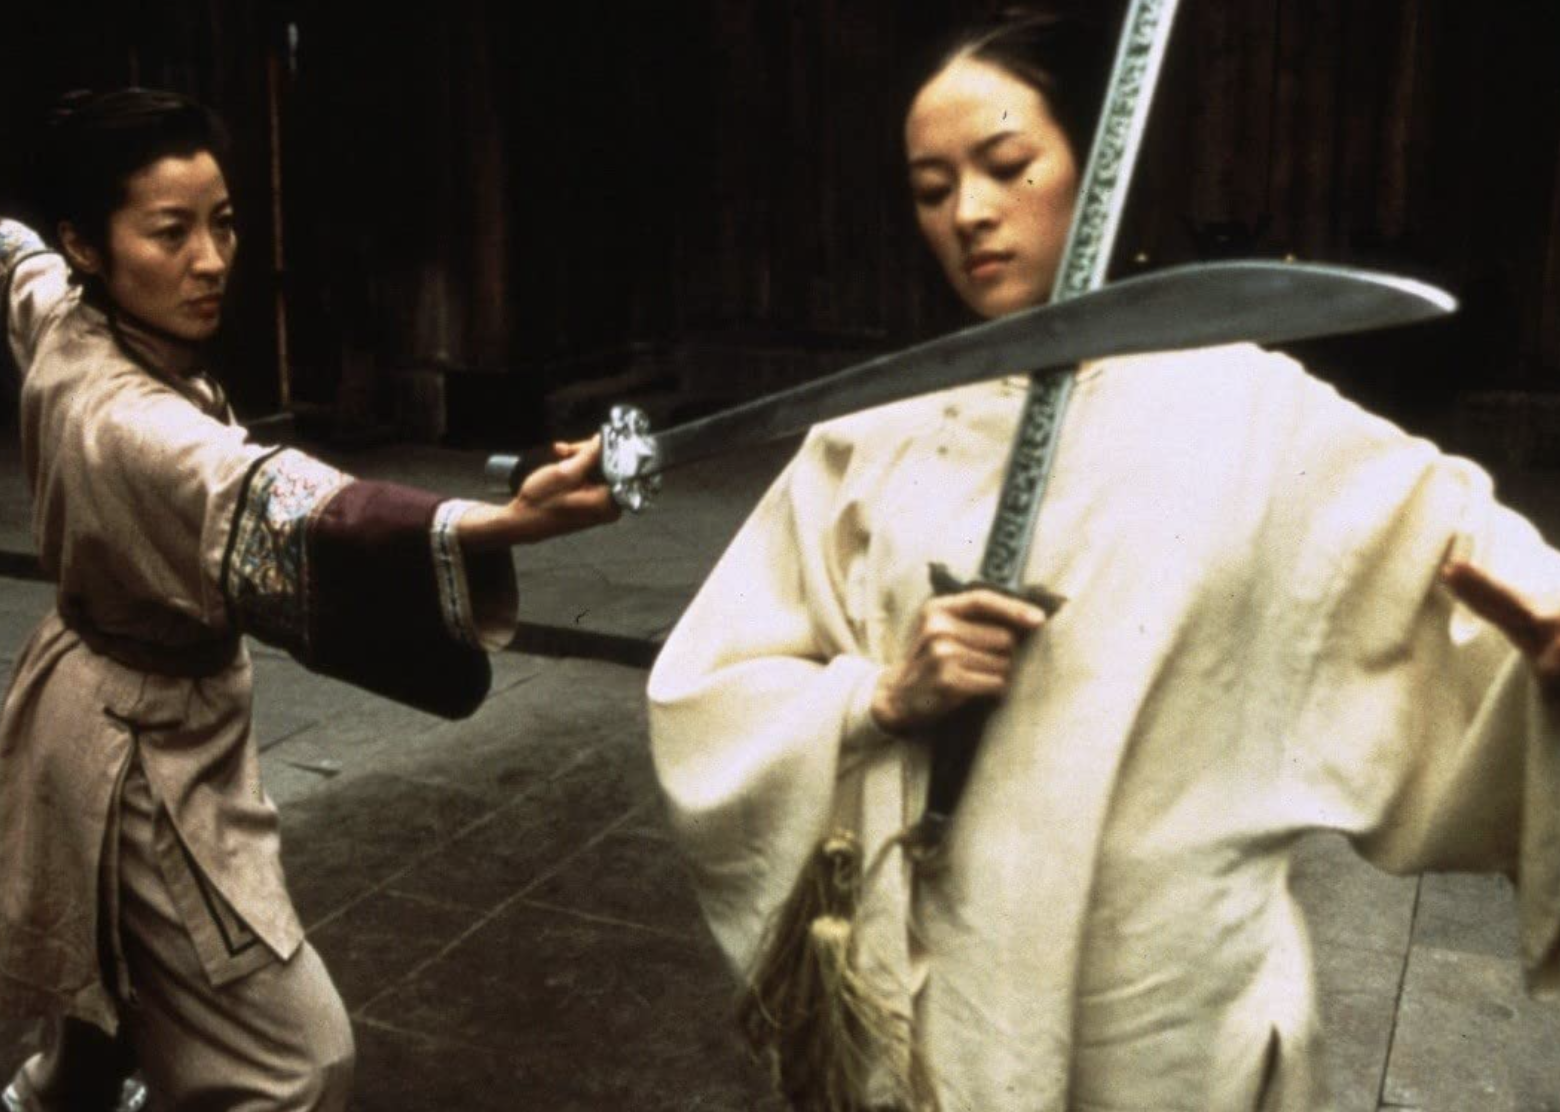 Michelle Yeoh and Ziyi Zhang in "Crouching Tiger, Hidden Dragon"